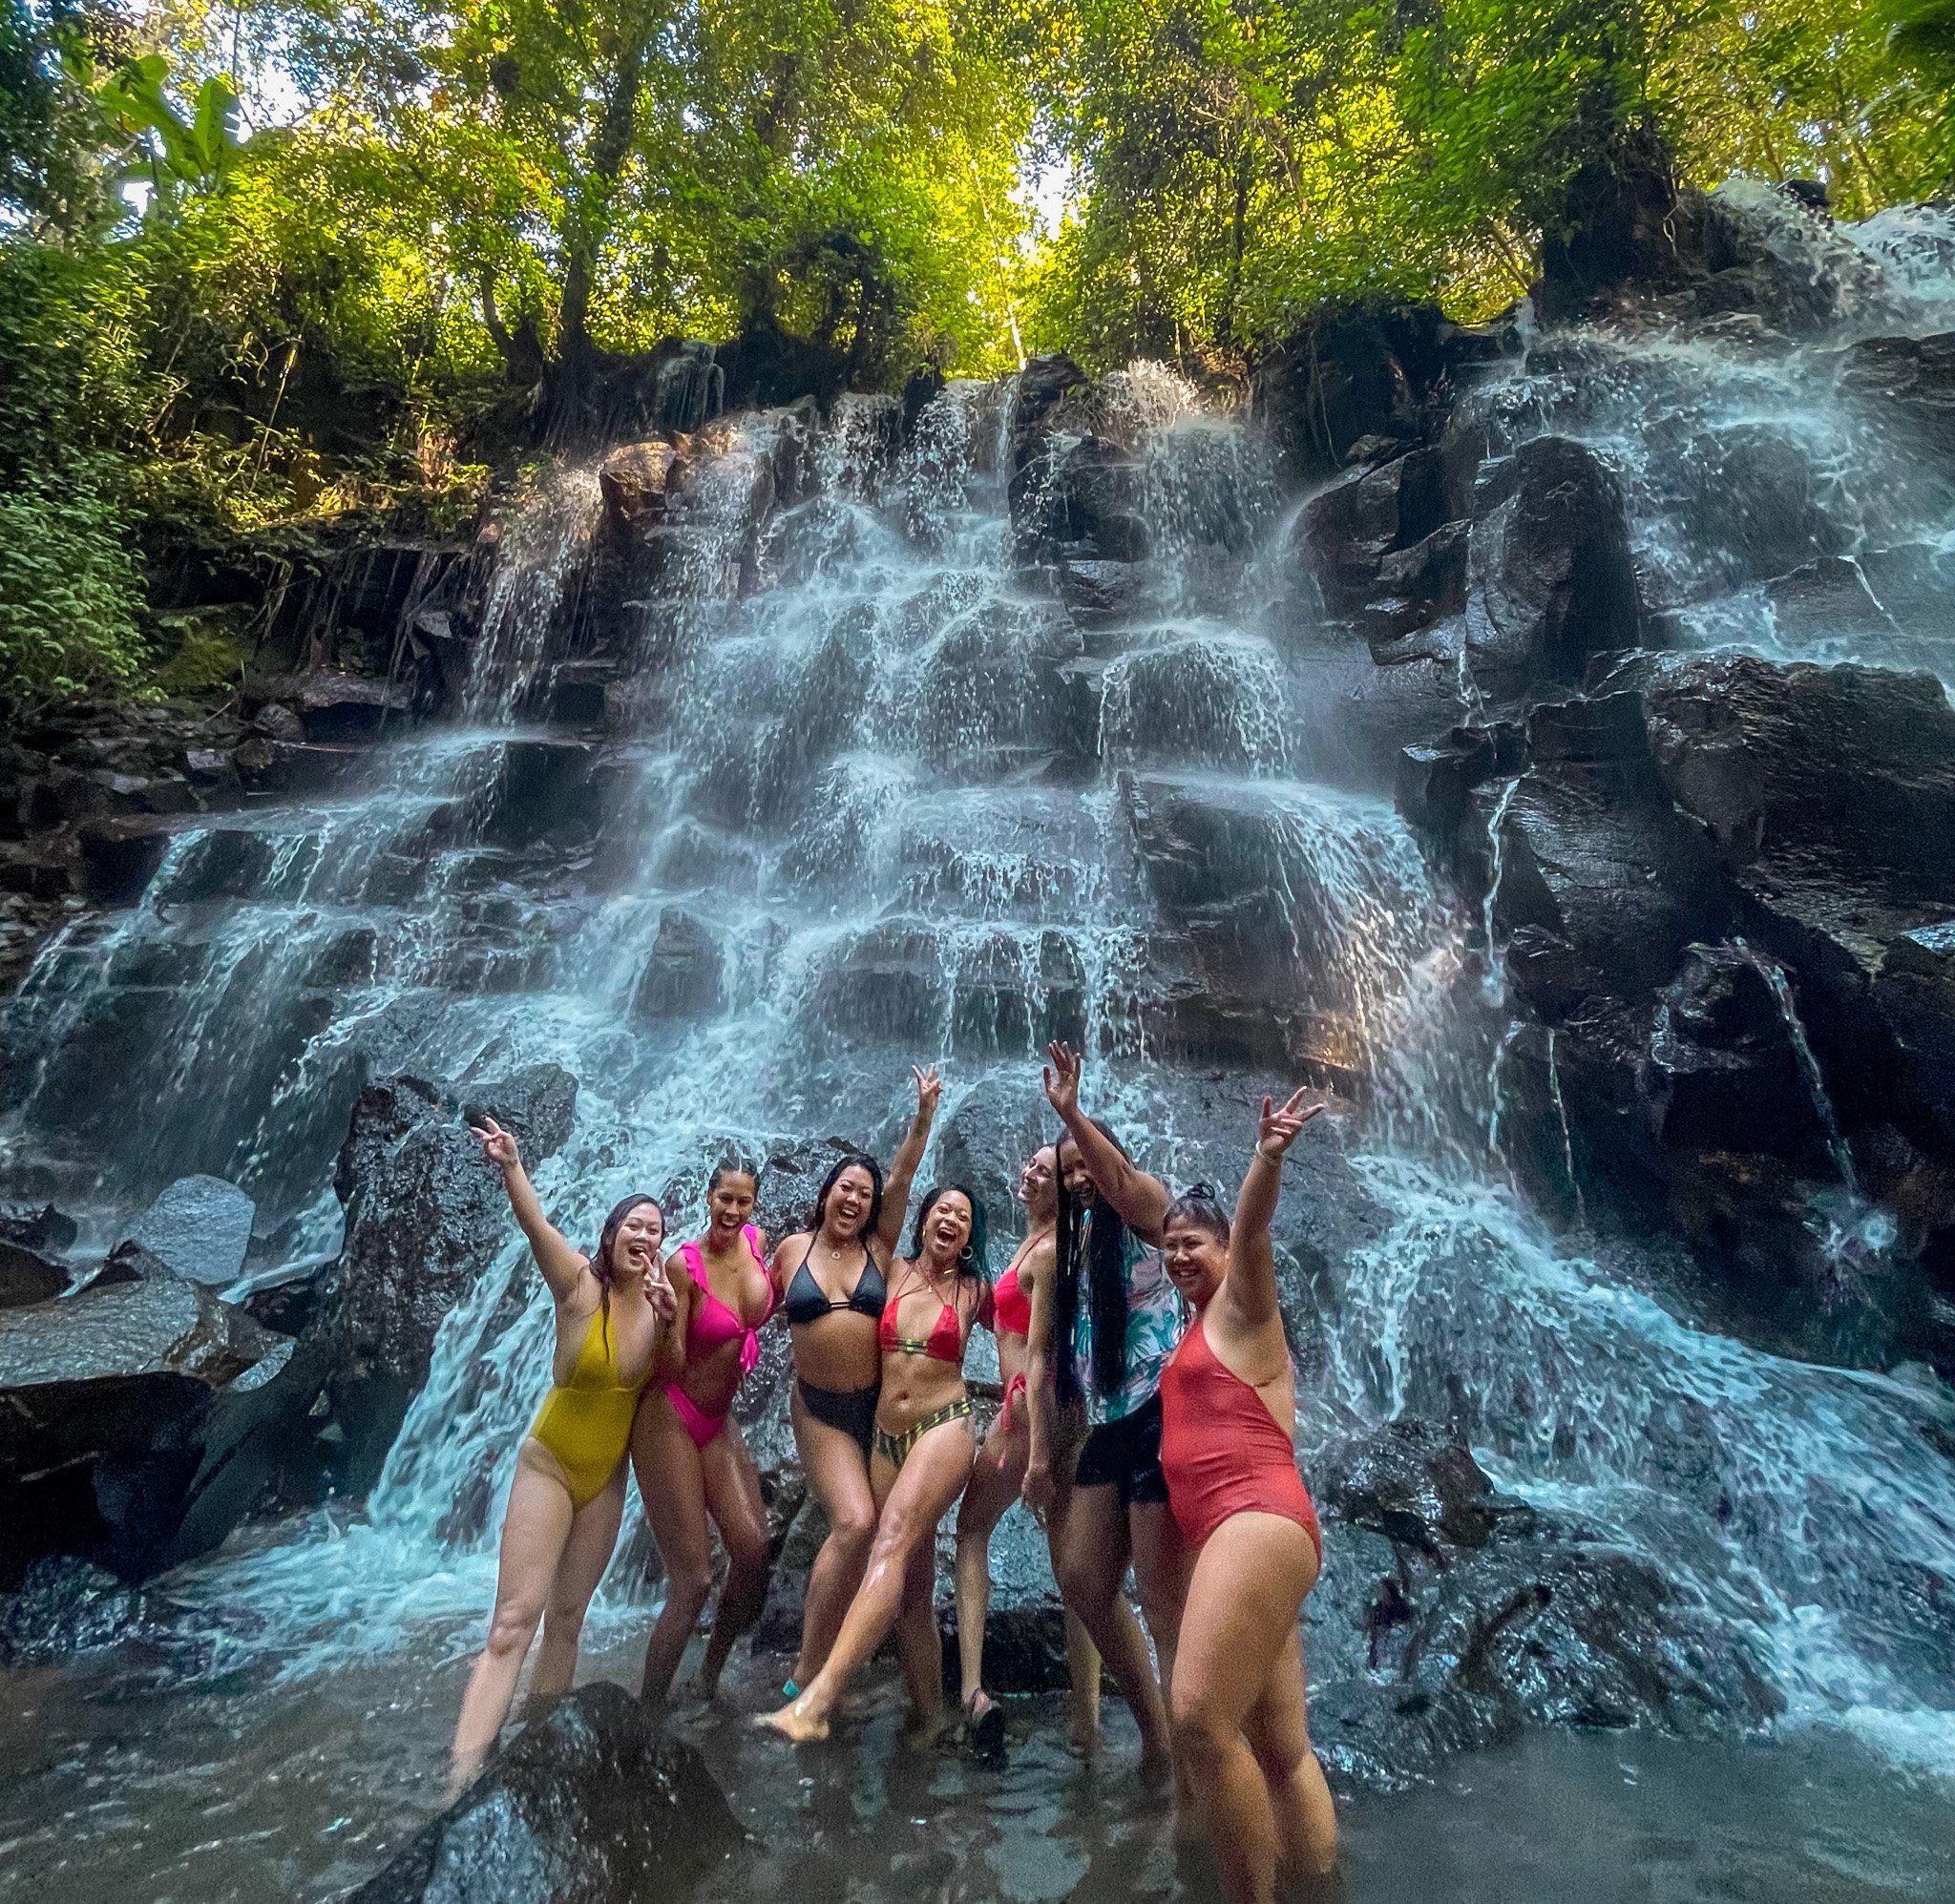 TrovaTrip Host @withrubina and travelers in Bali under waterfall.